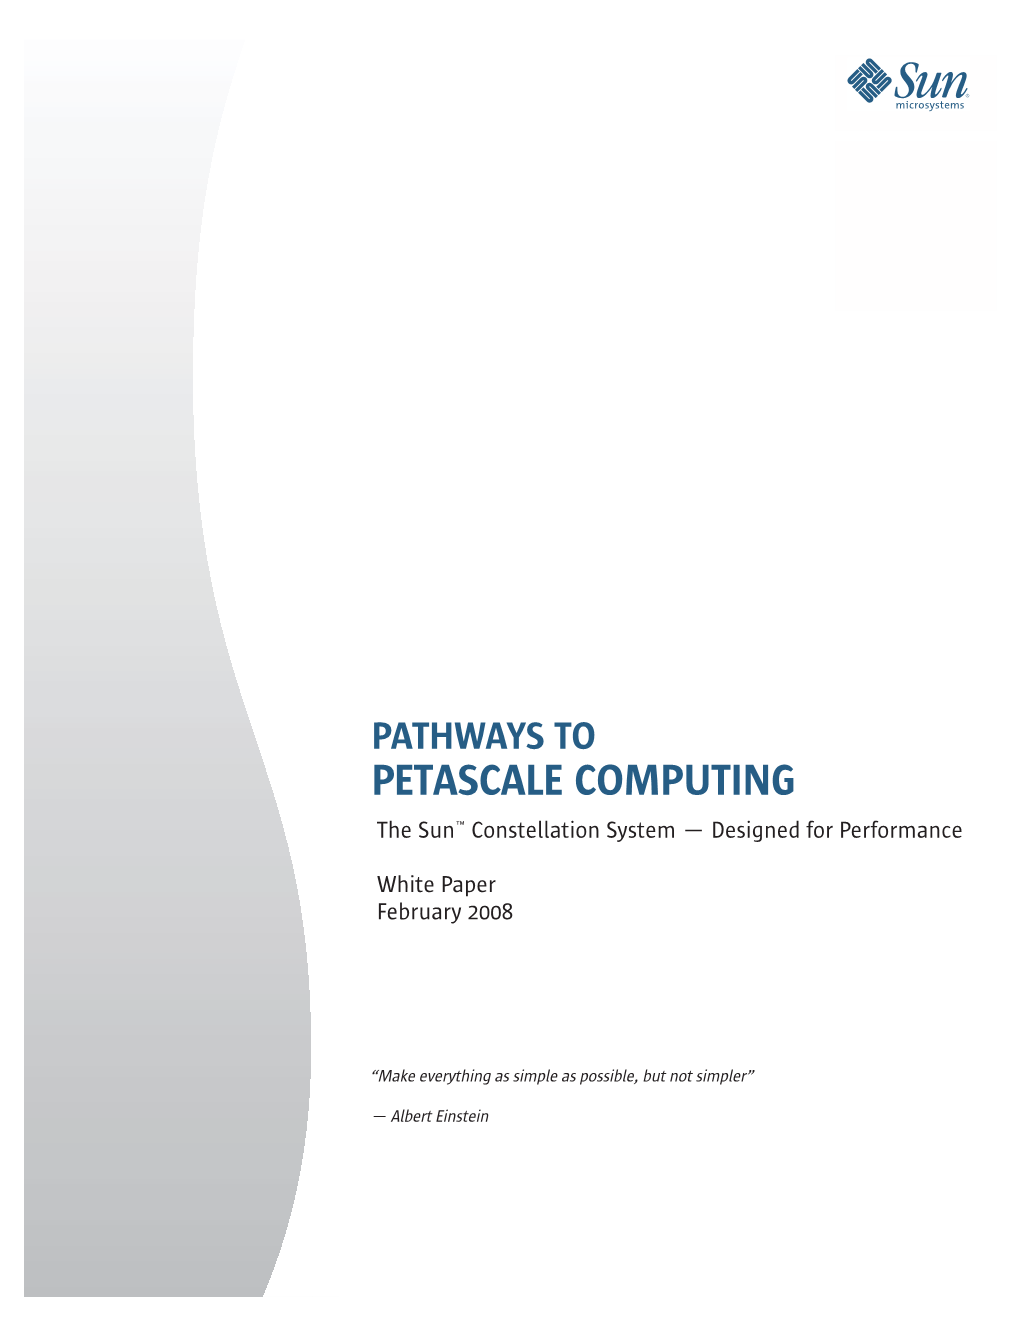 PETASCALE COMPUTING the Sun™ Constellation System — Designed for Performance